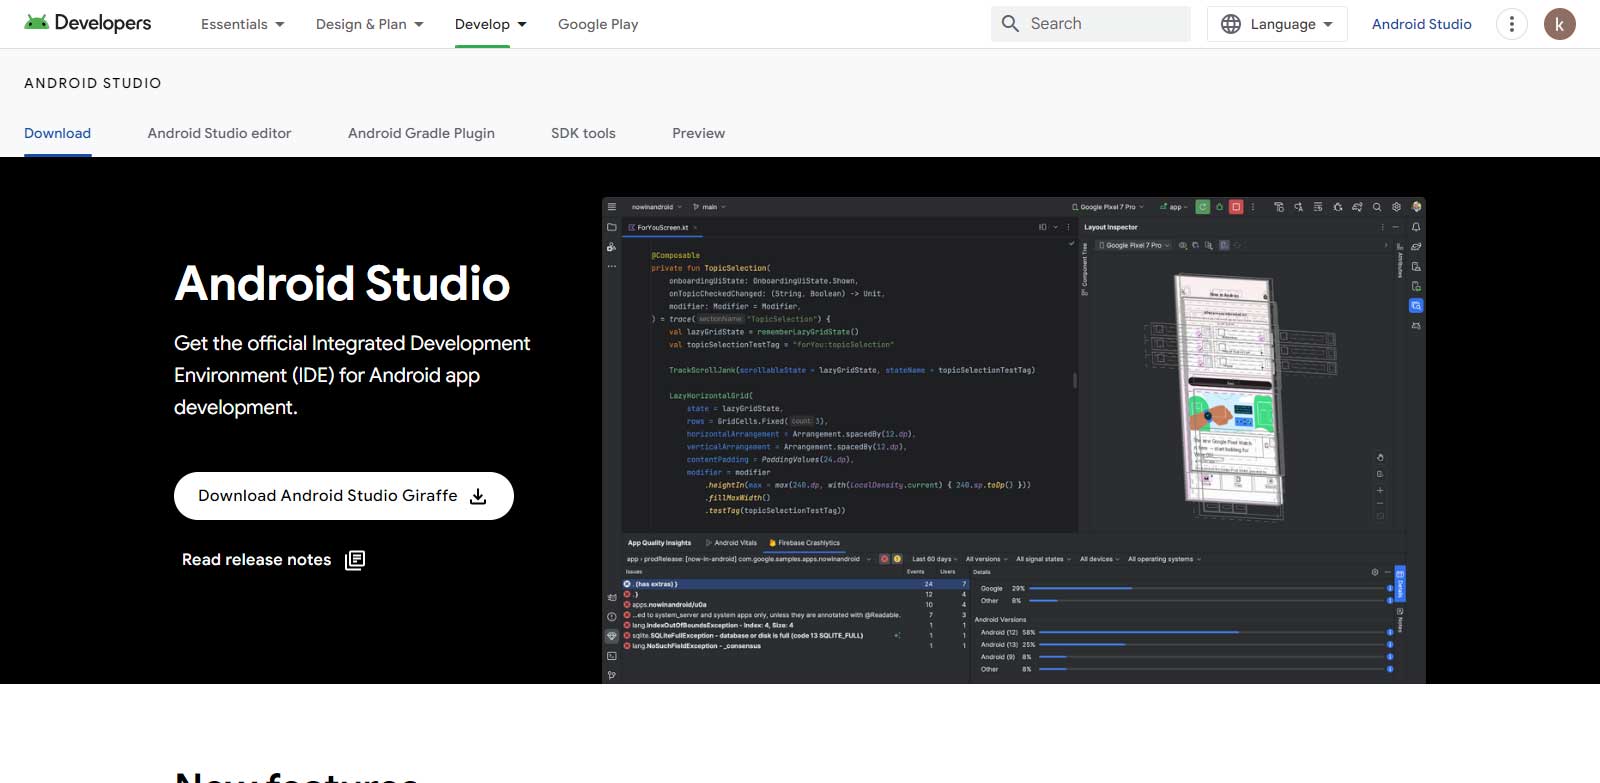 Android-Studio-&-App-Tools For Android-Developer